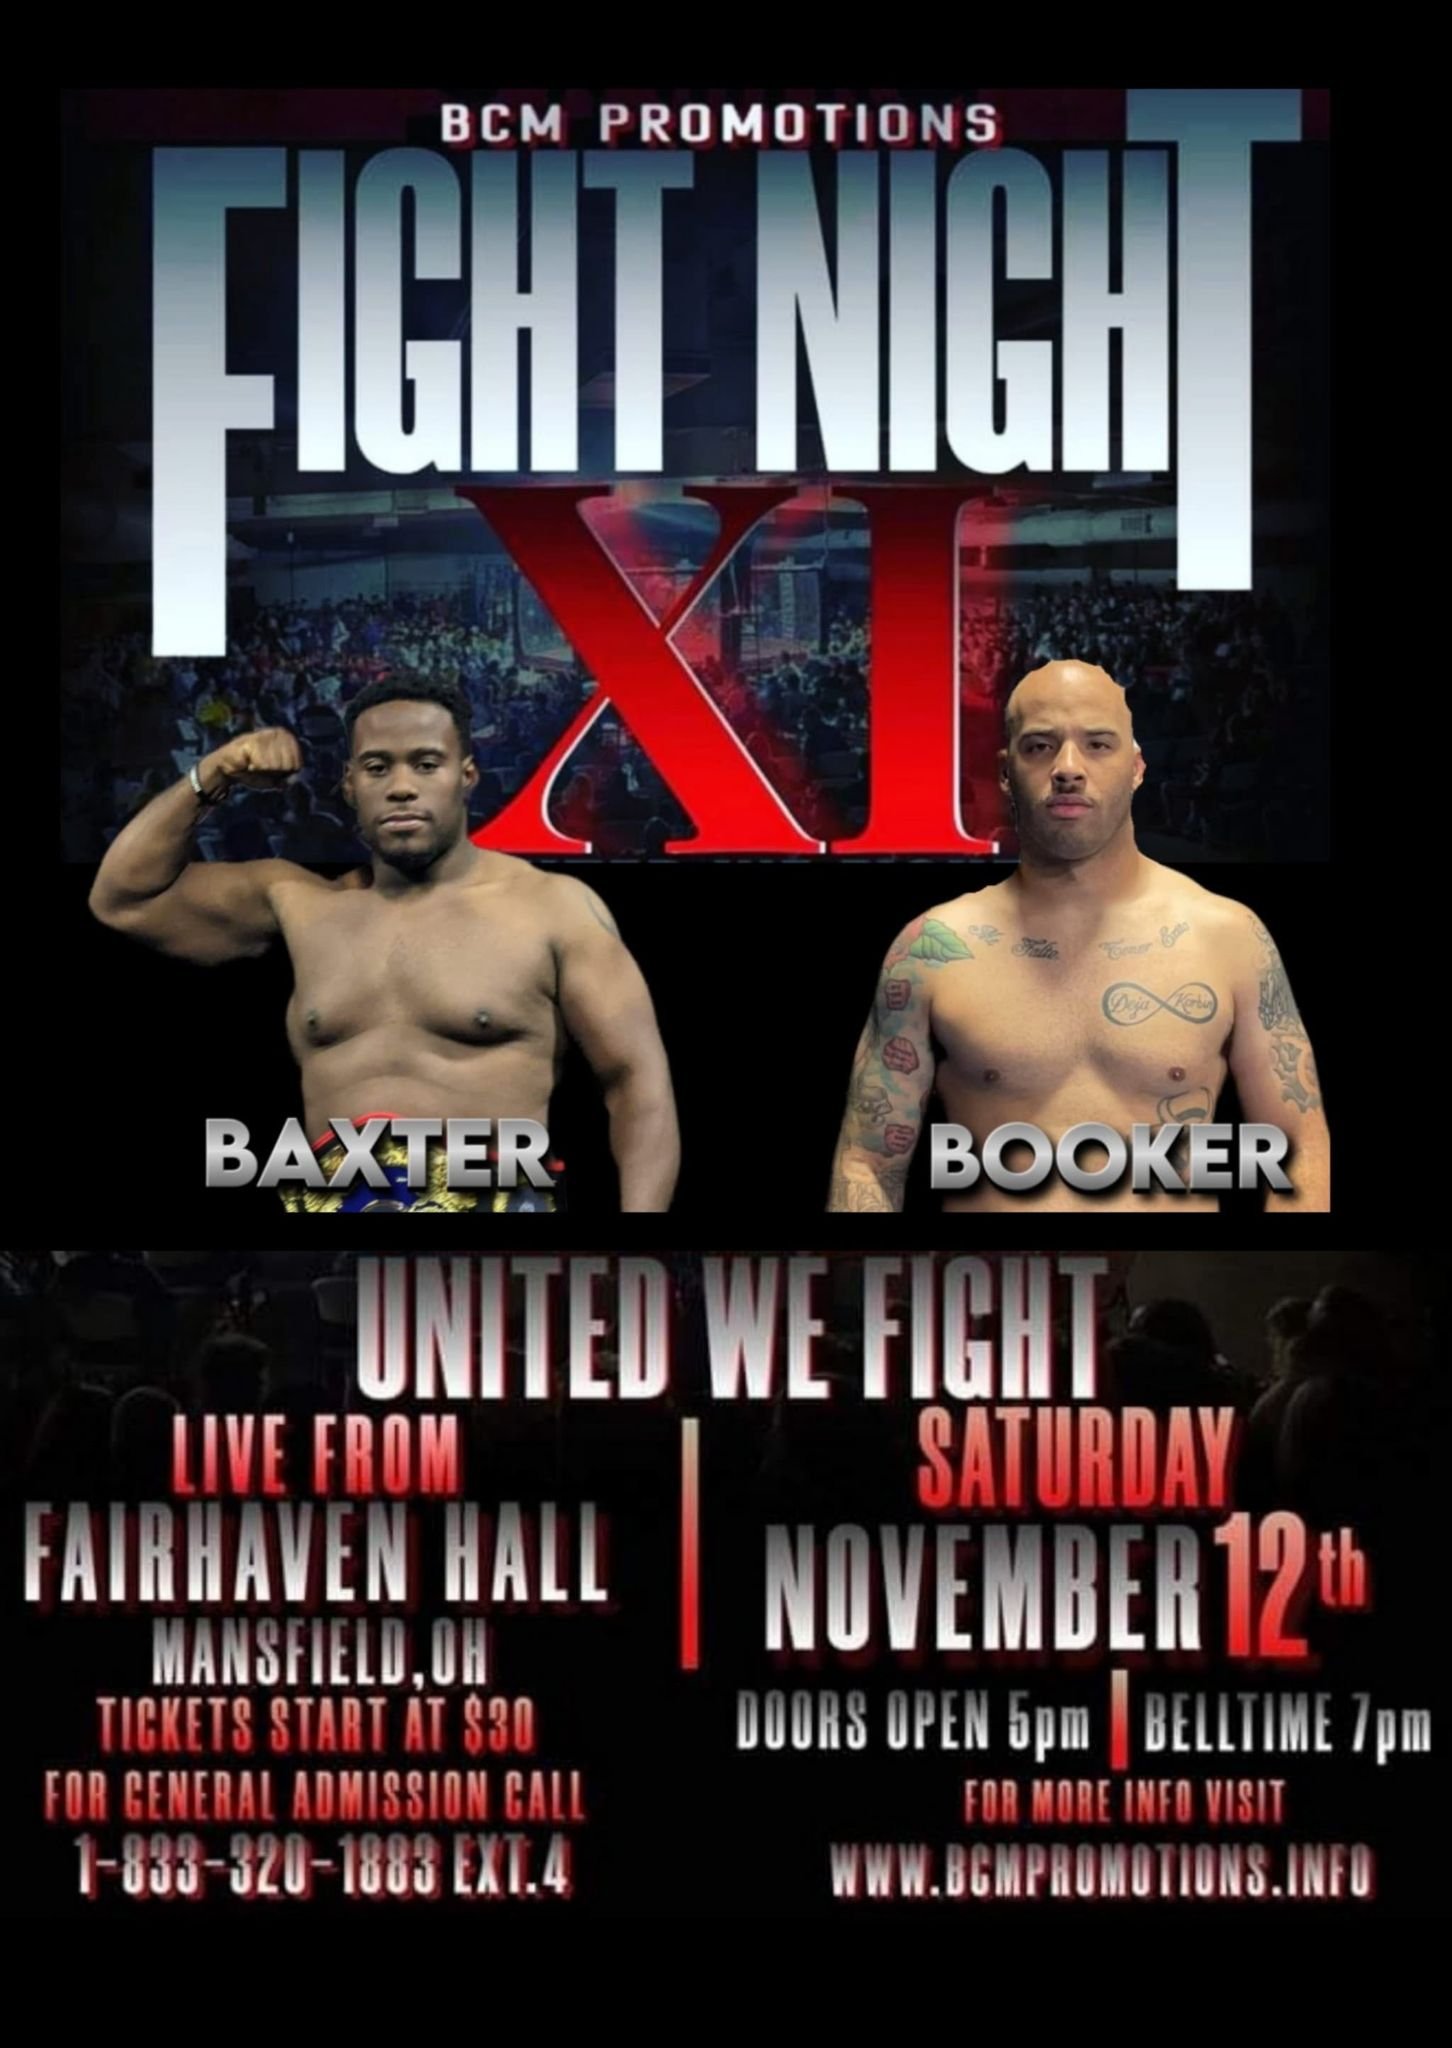 Will Baxter looks to become double champ against Darryl Booker at BCM Fight Night 10